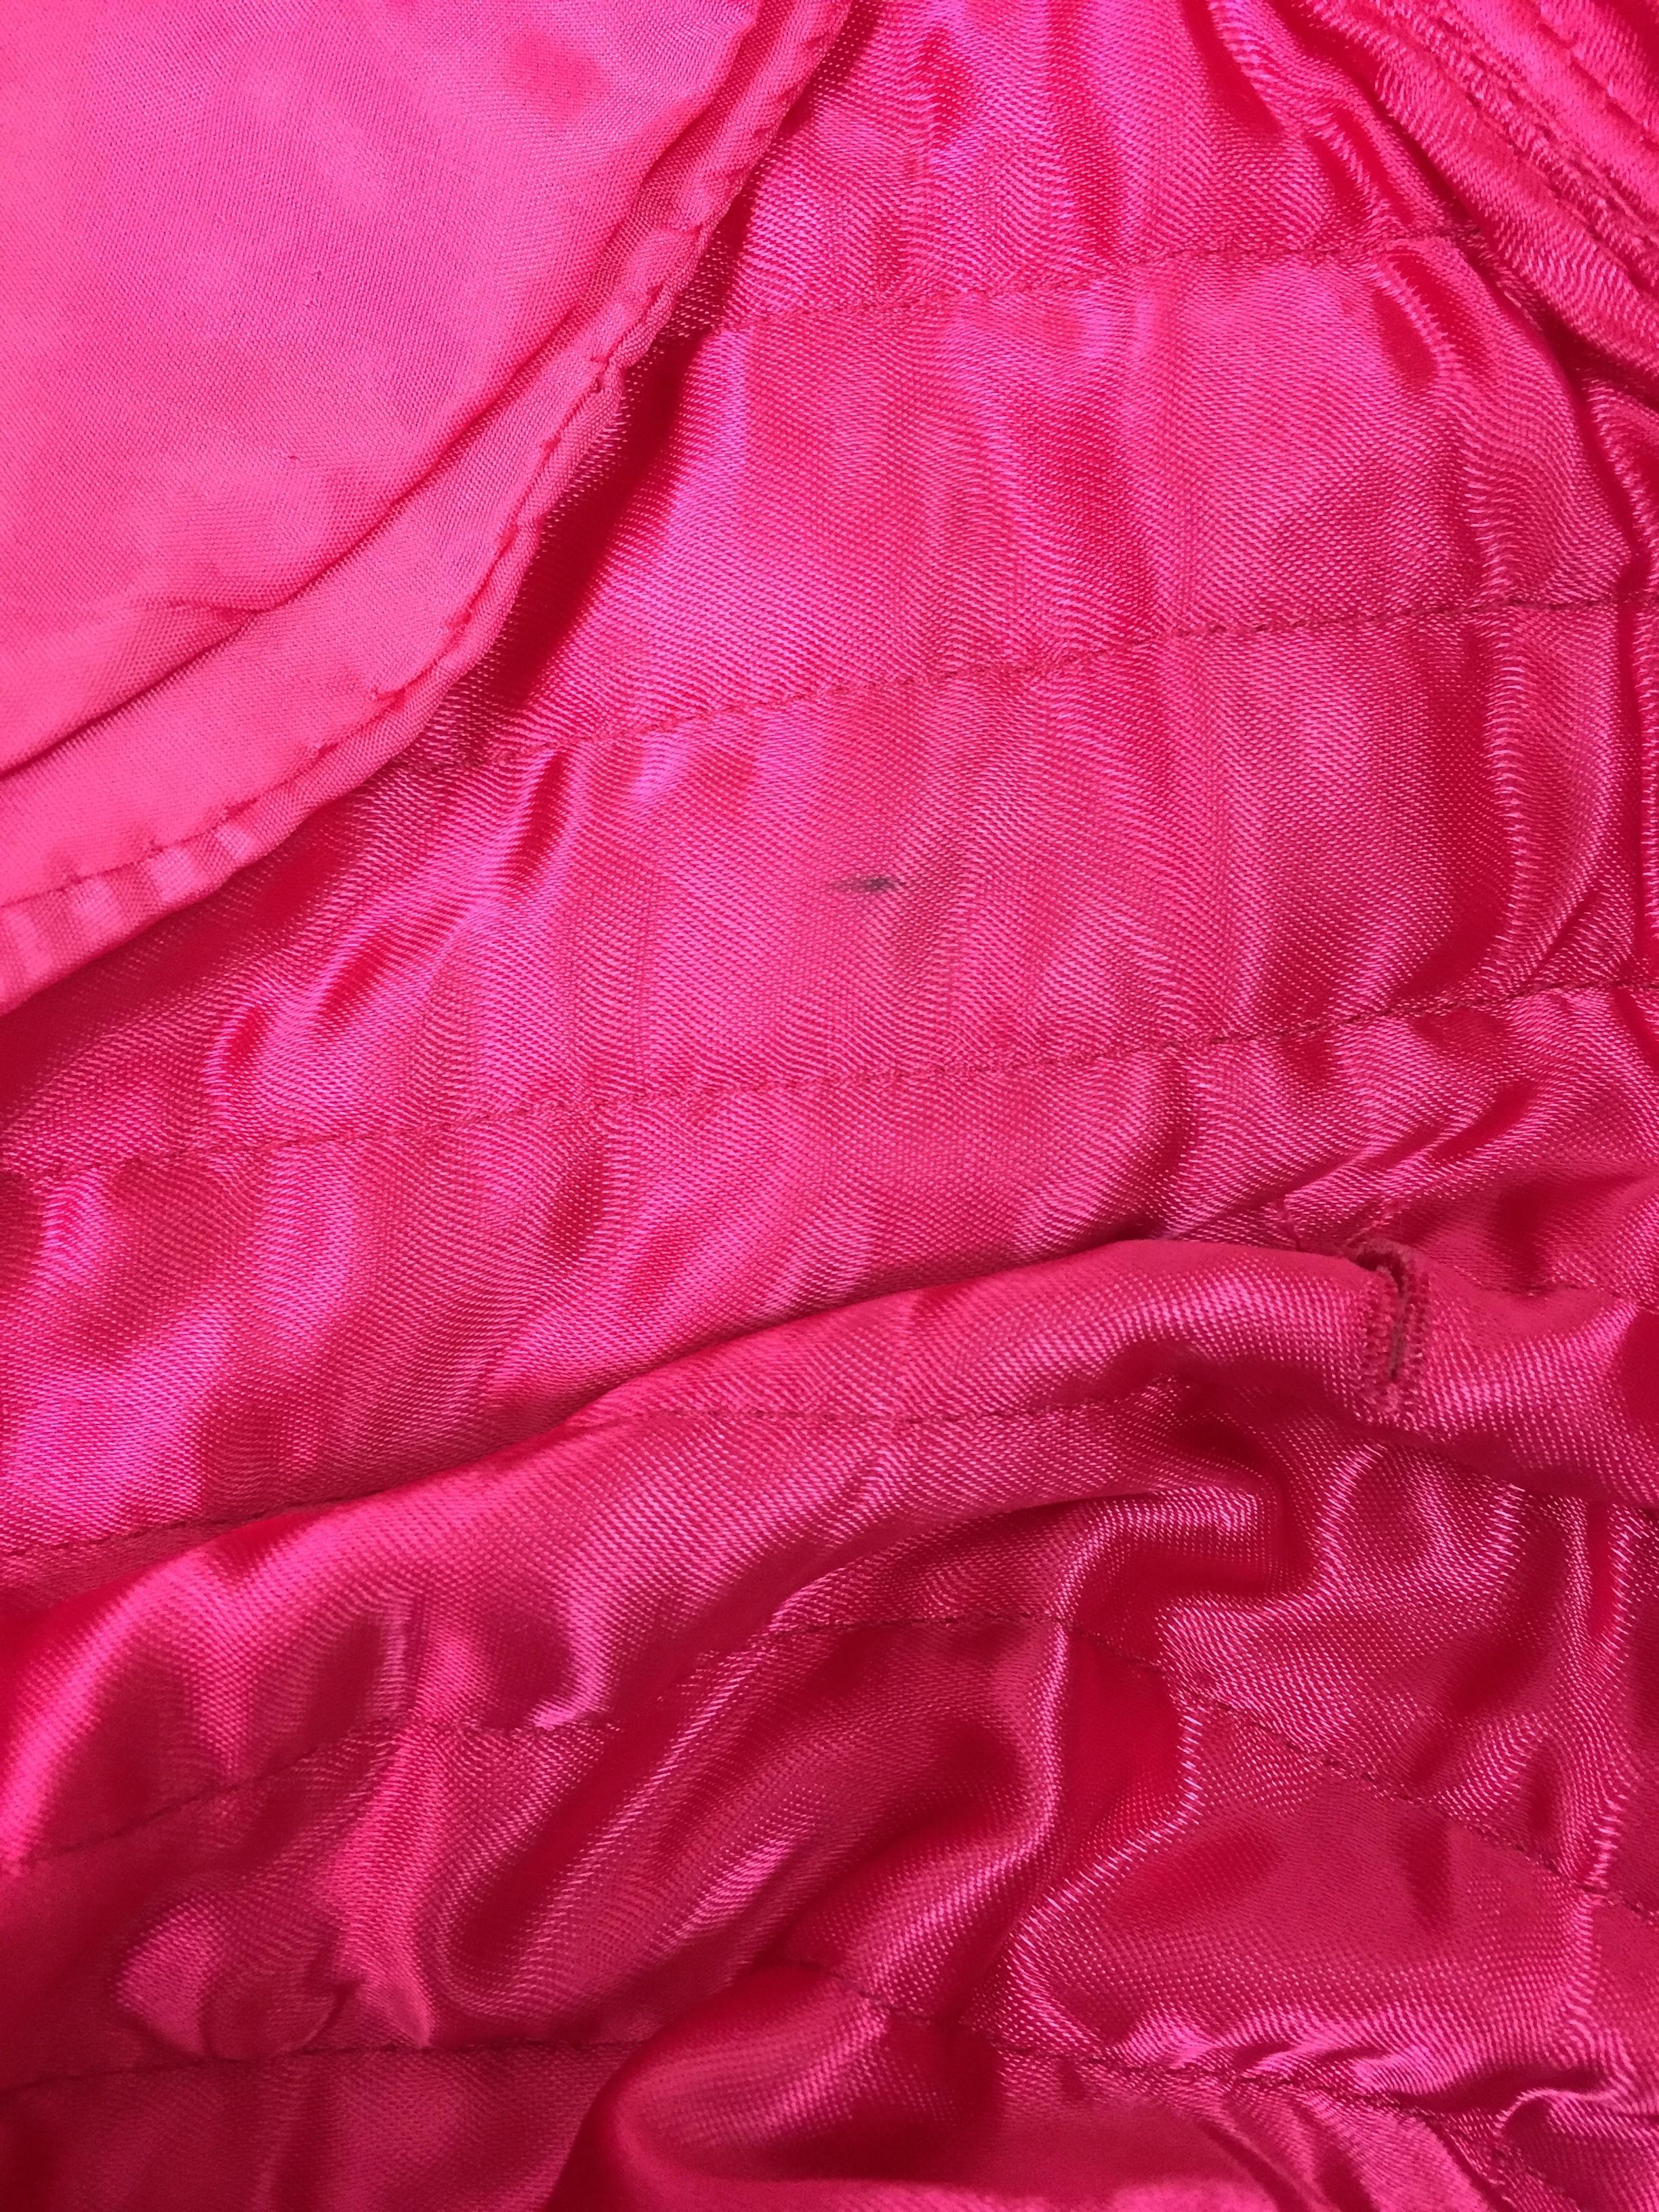 Women's Gianfranco Ferre Pink Quilted Opera Coat Jacket with Feathers, 1990s 